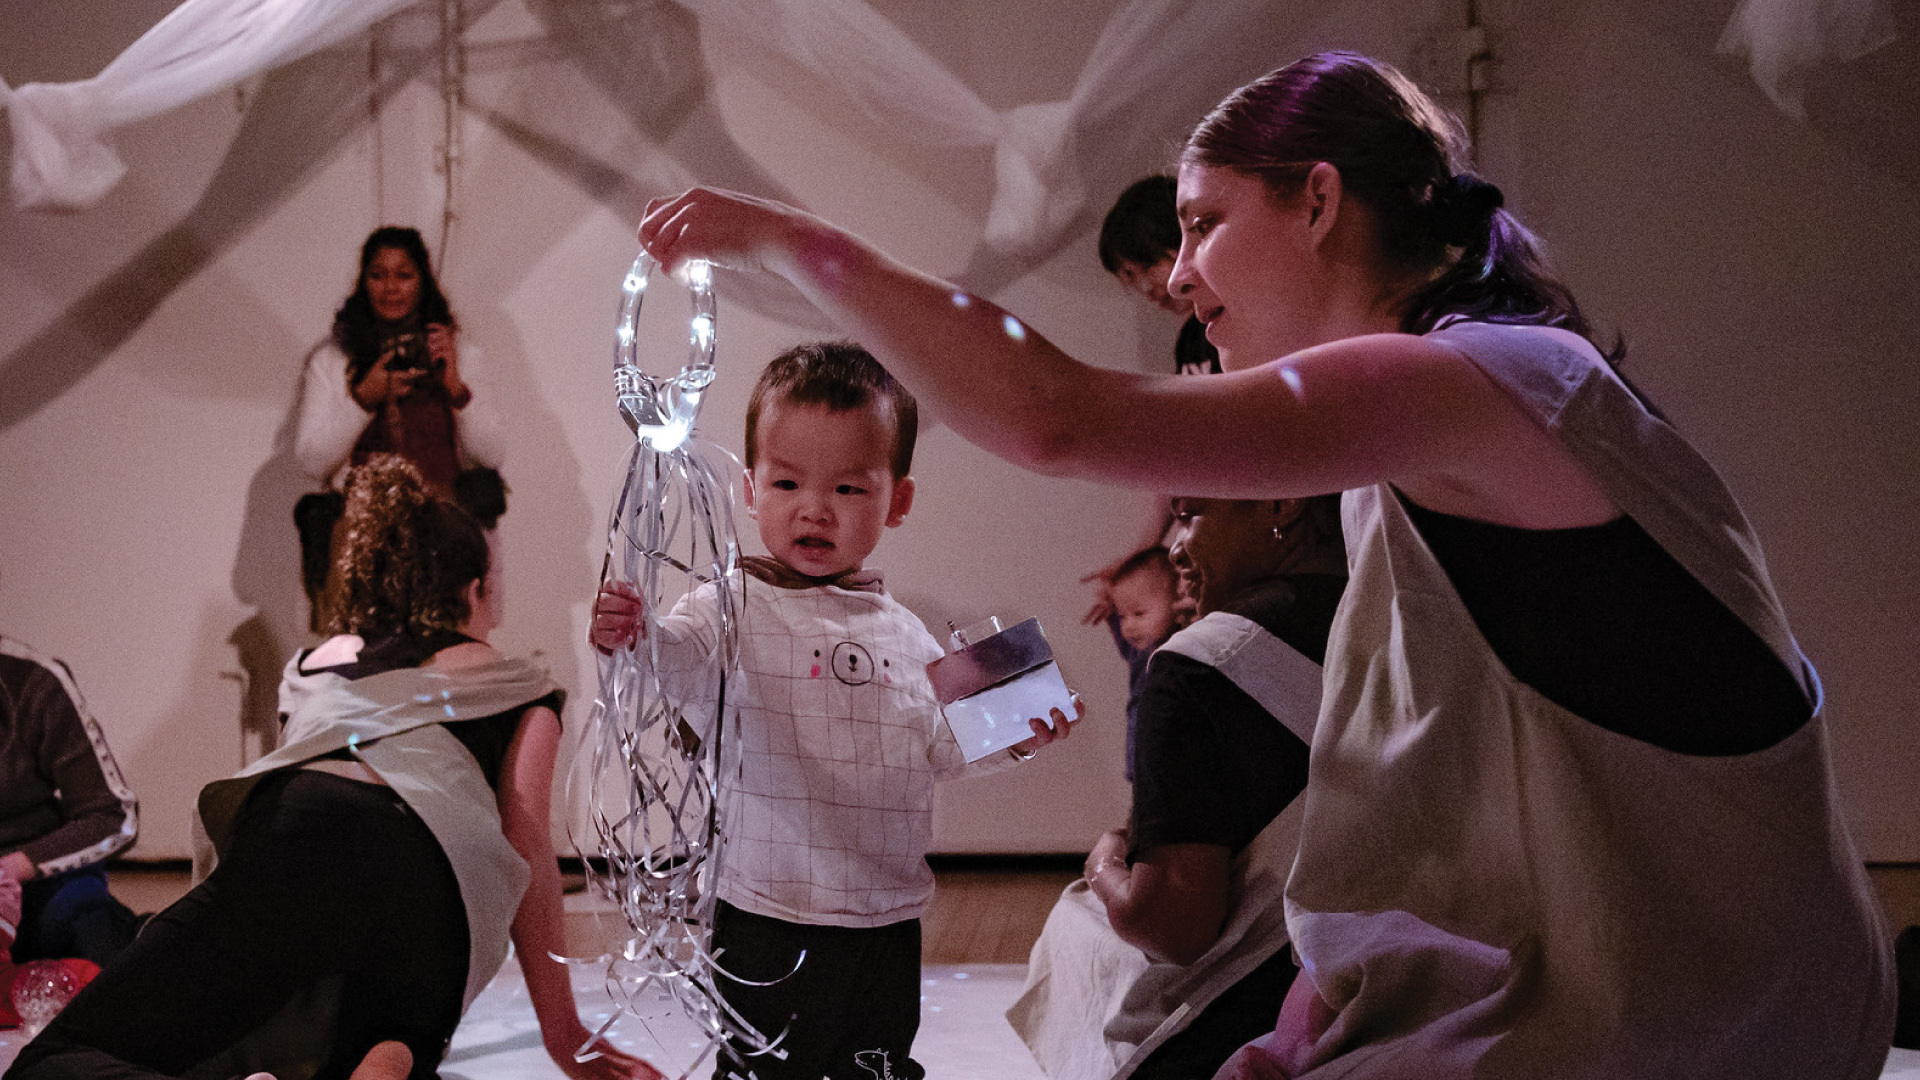 A performer holds a ring of lights, a child reaches out to explore.